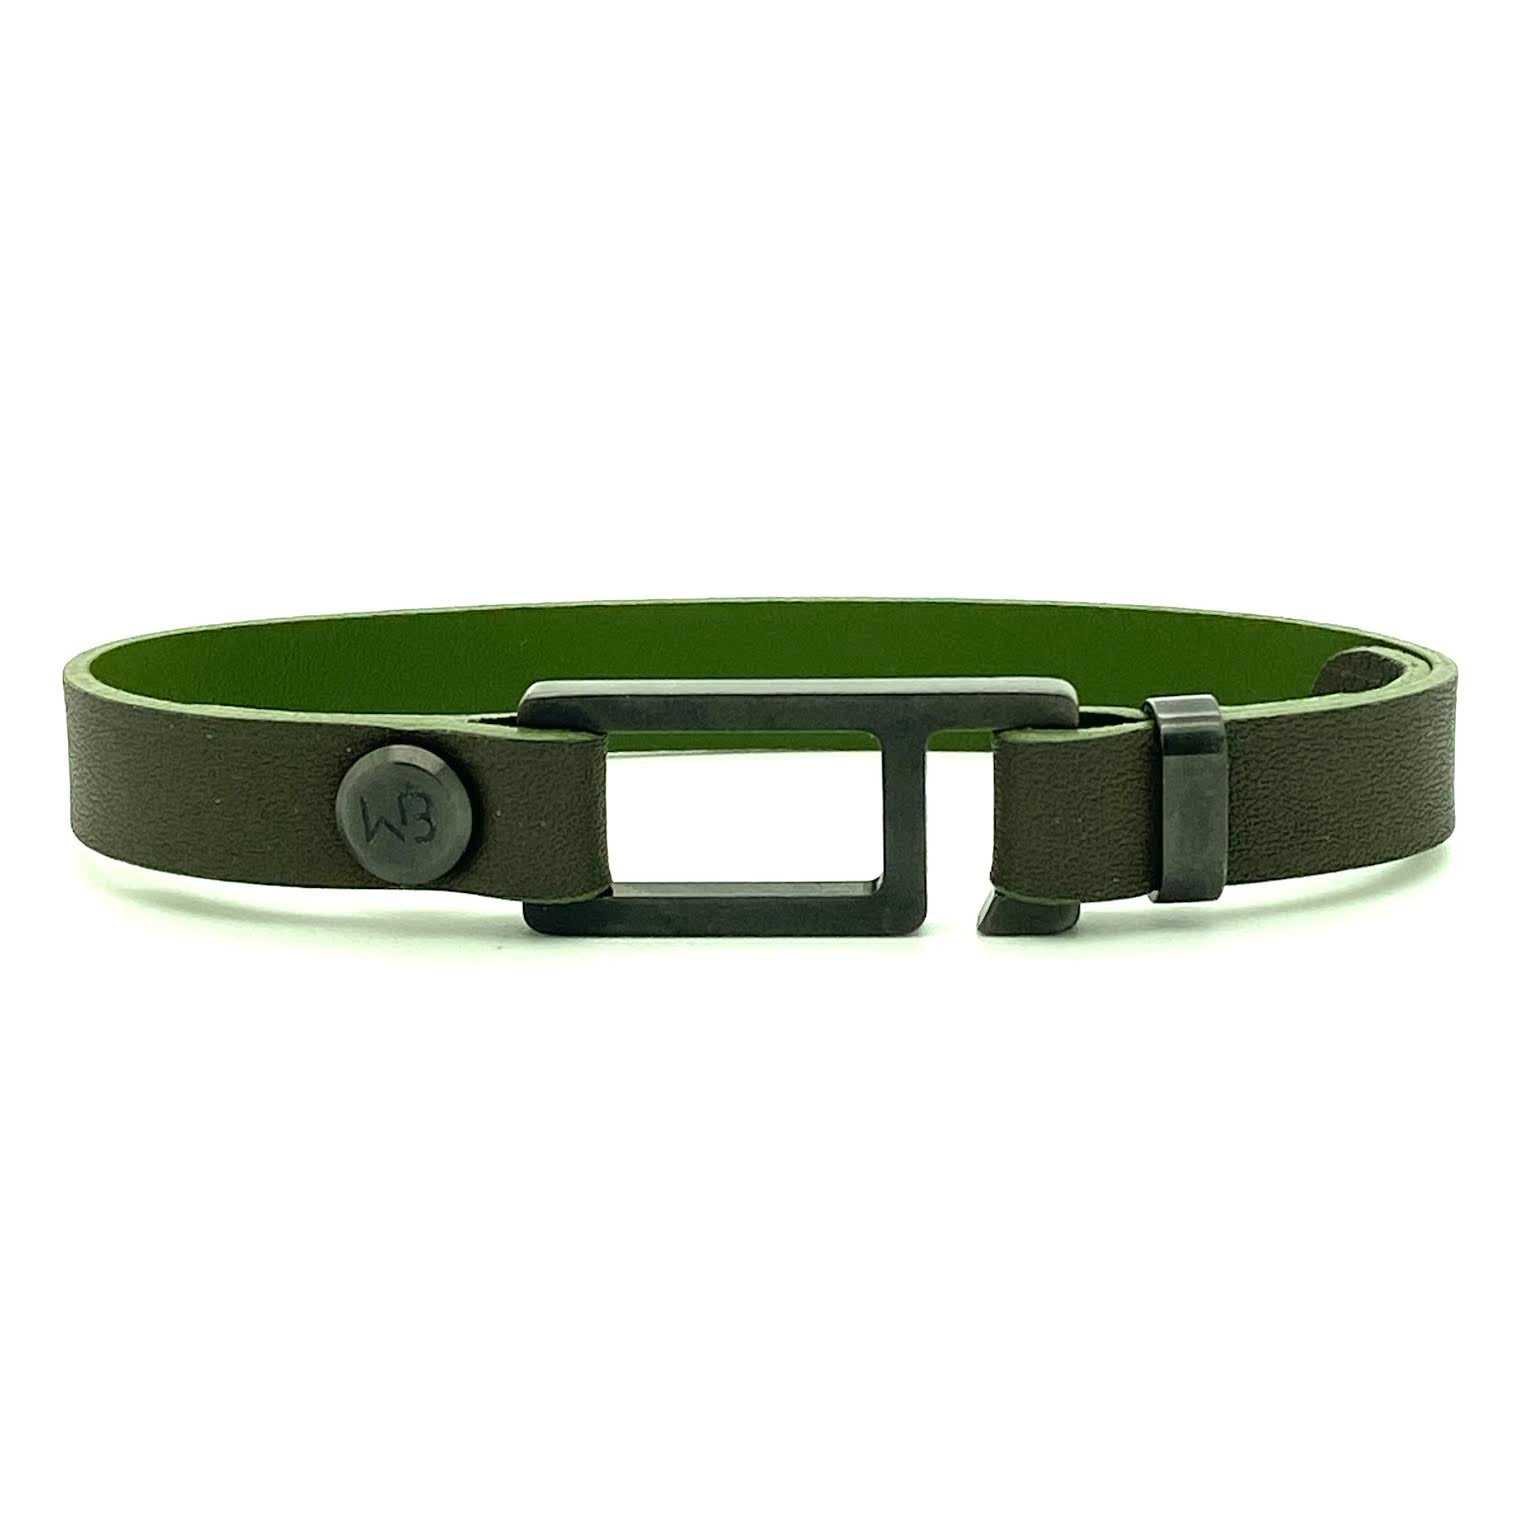 Our striking RMG military green Italian leather bracelet is paired perfectly with our artisan designed, lightly brushed hardware. Your hardware choices include Rose Gold, Yellow Gold, Stainless Steel or Black Ceramic. This adjustable size bracelet is a distinctive piece worn alone or with a WristBend stacking bracelet. Made by WristBend